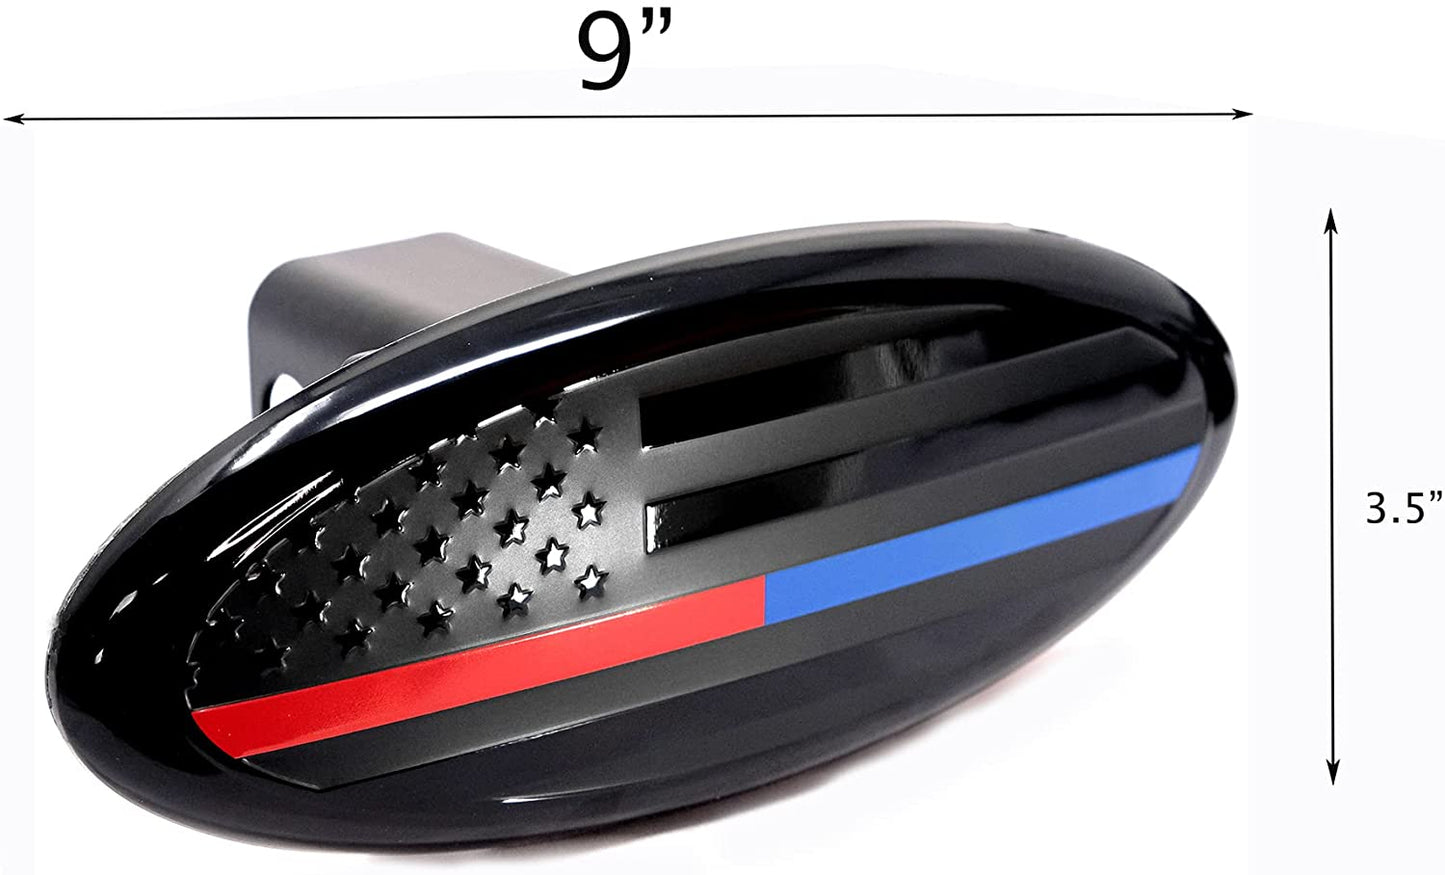 American Flag Black Oval Metal Trailer Hitch Cover (Fits 2", 2.5" Receivers)